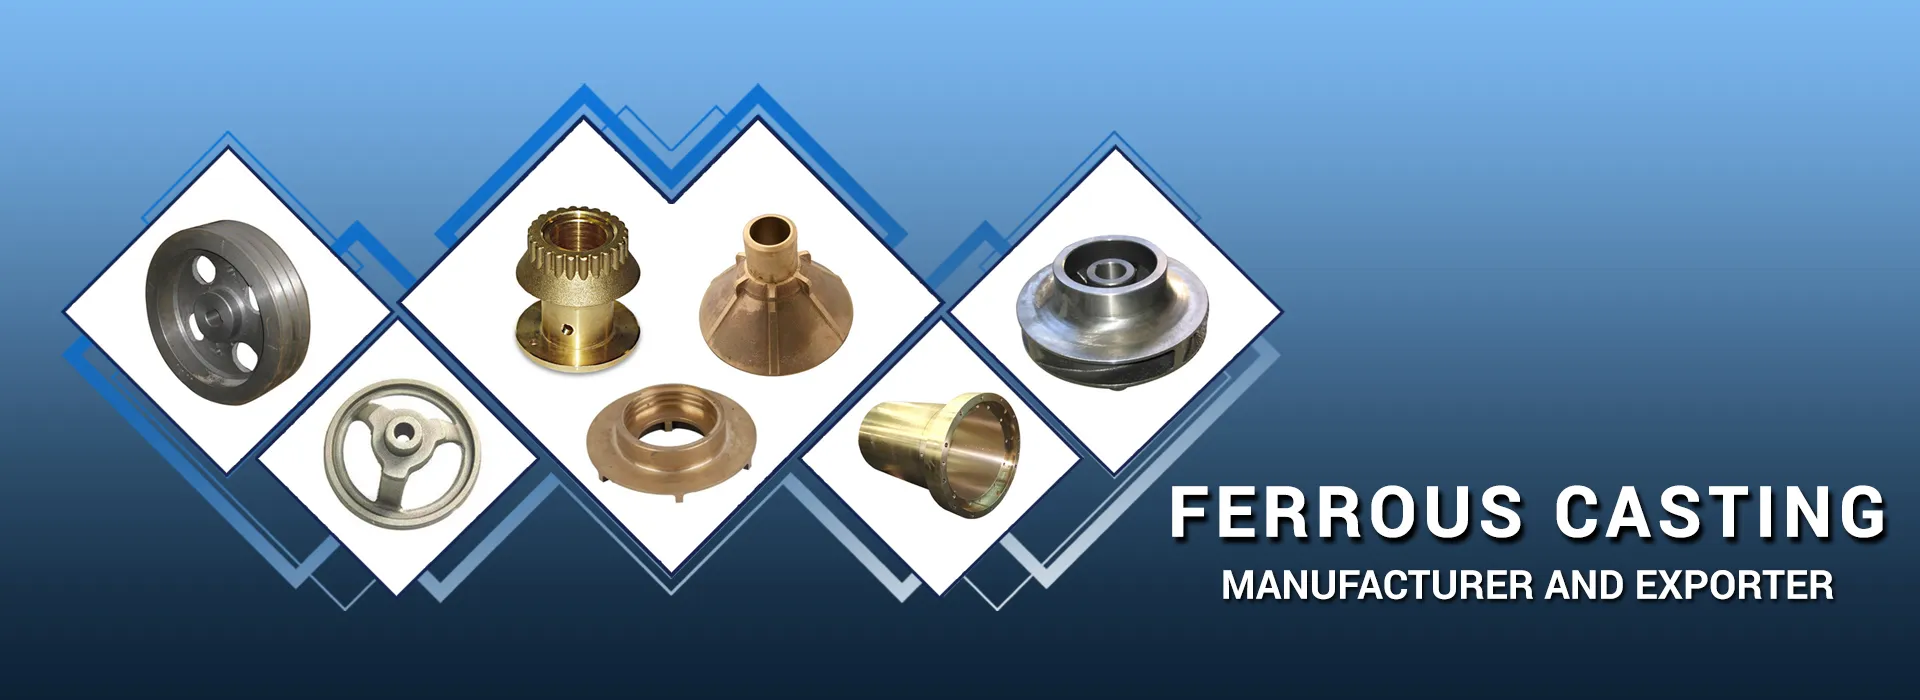 Sand Casting Manufacturer, Suppliers in india, rajkot, ahmedabad